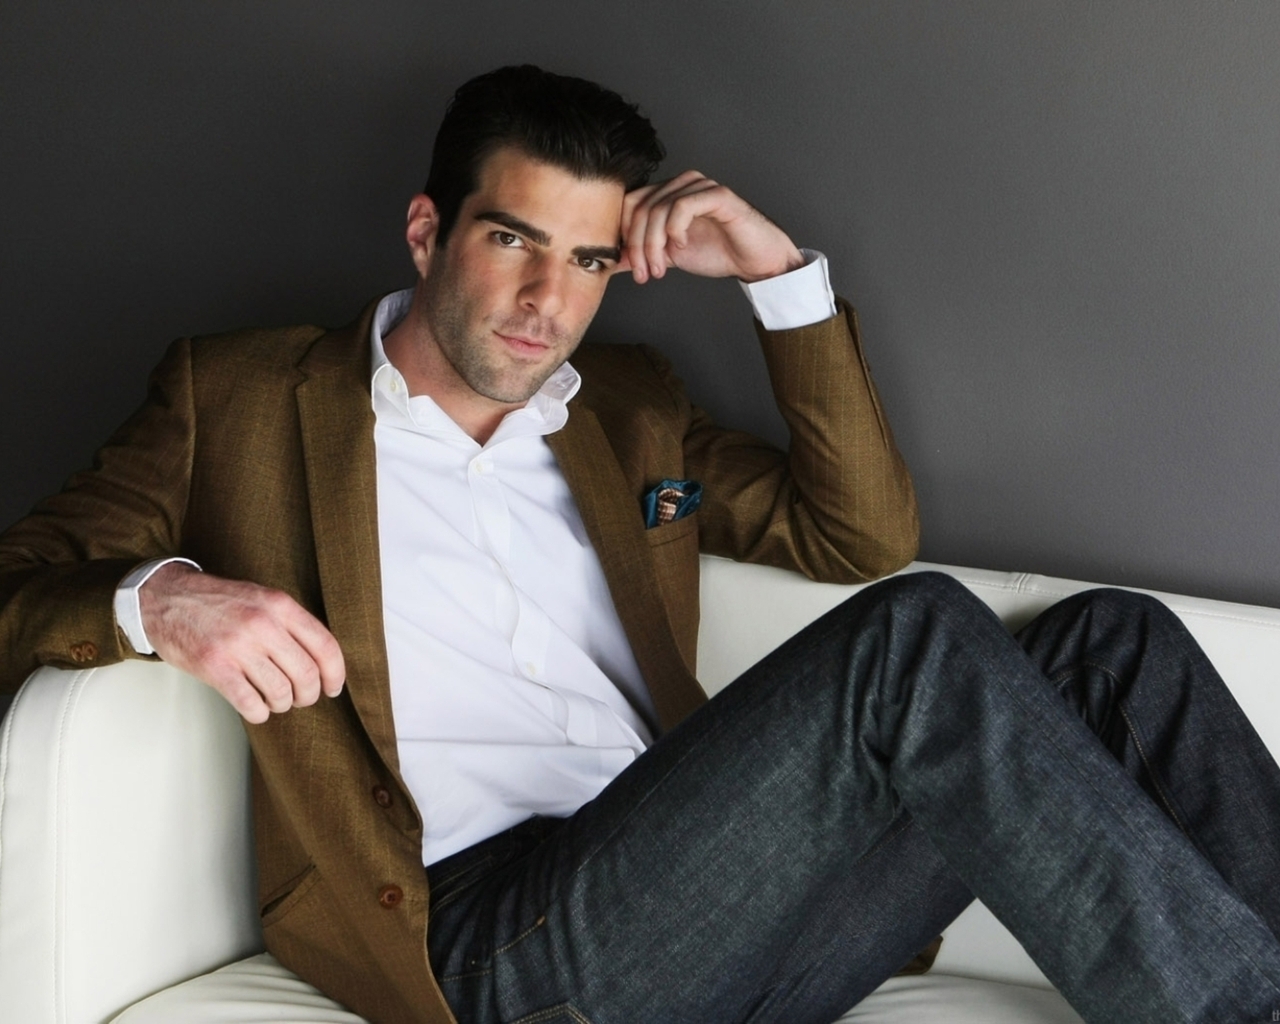 Zachary Quinto for 1280 x 1024 resolution